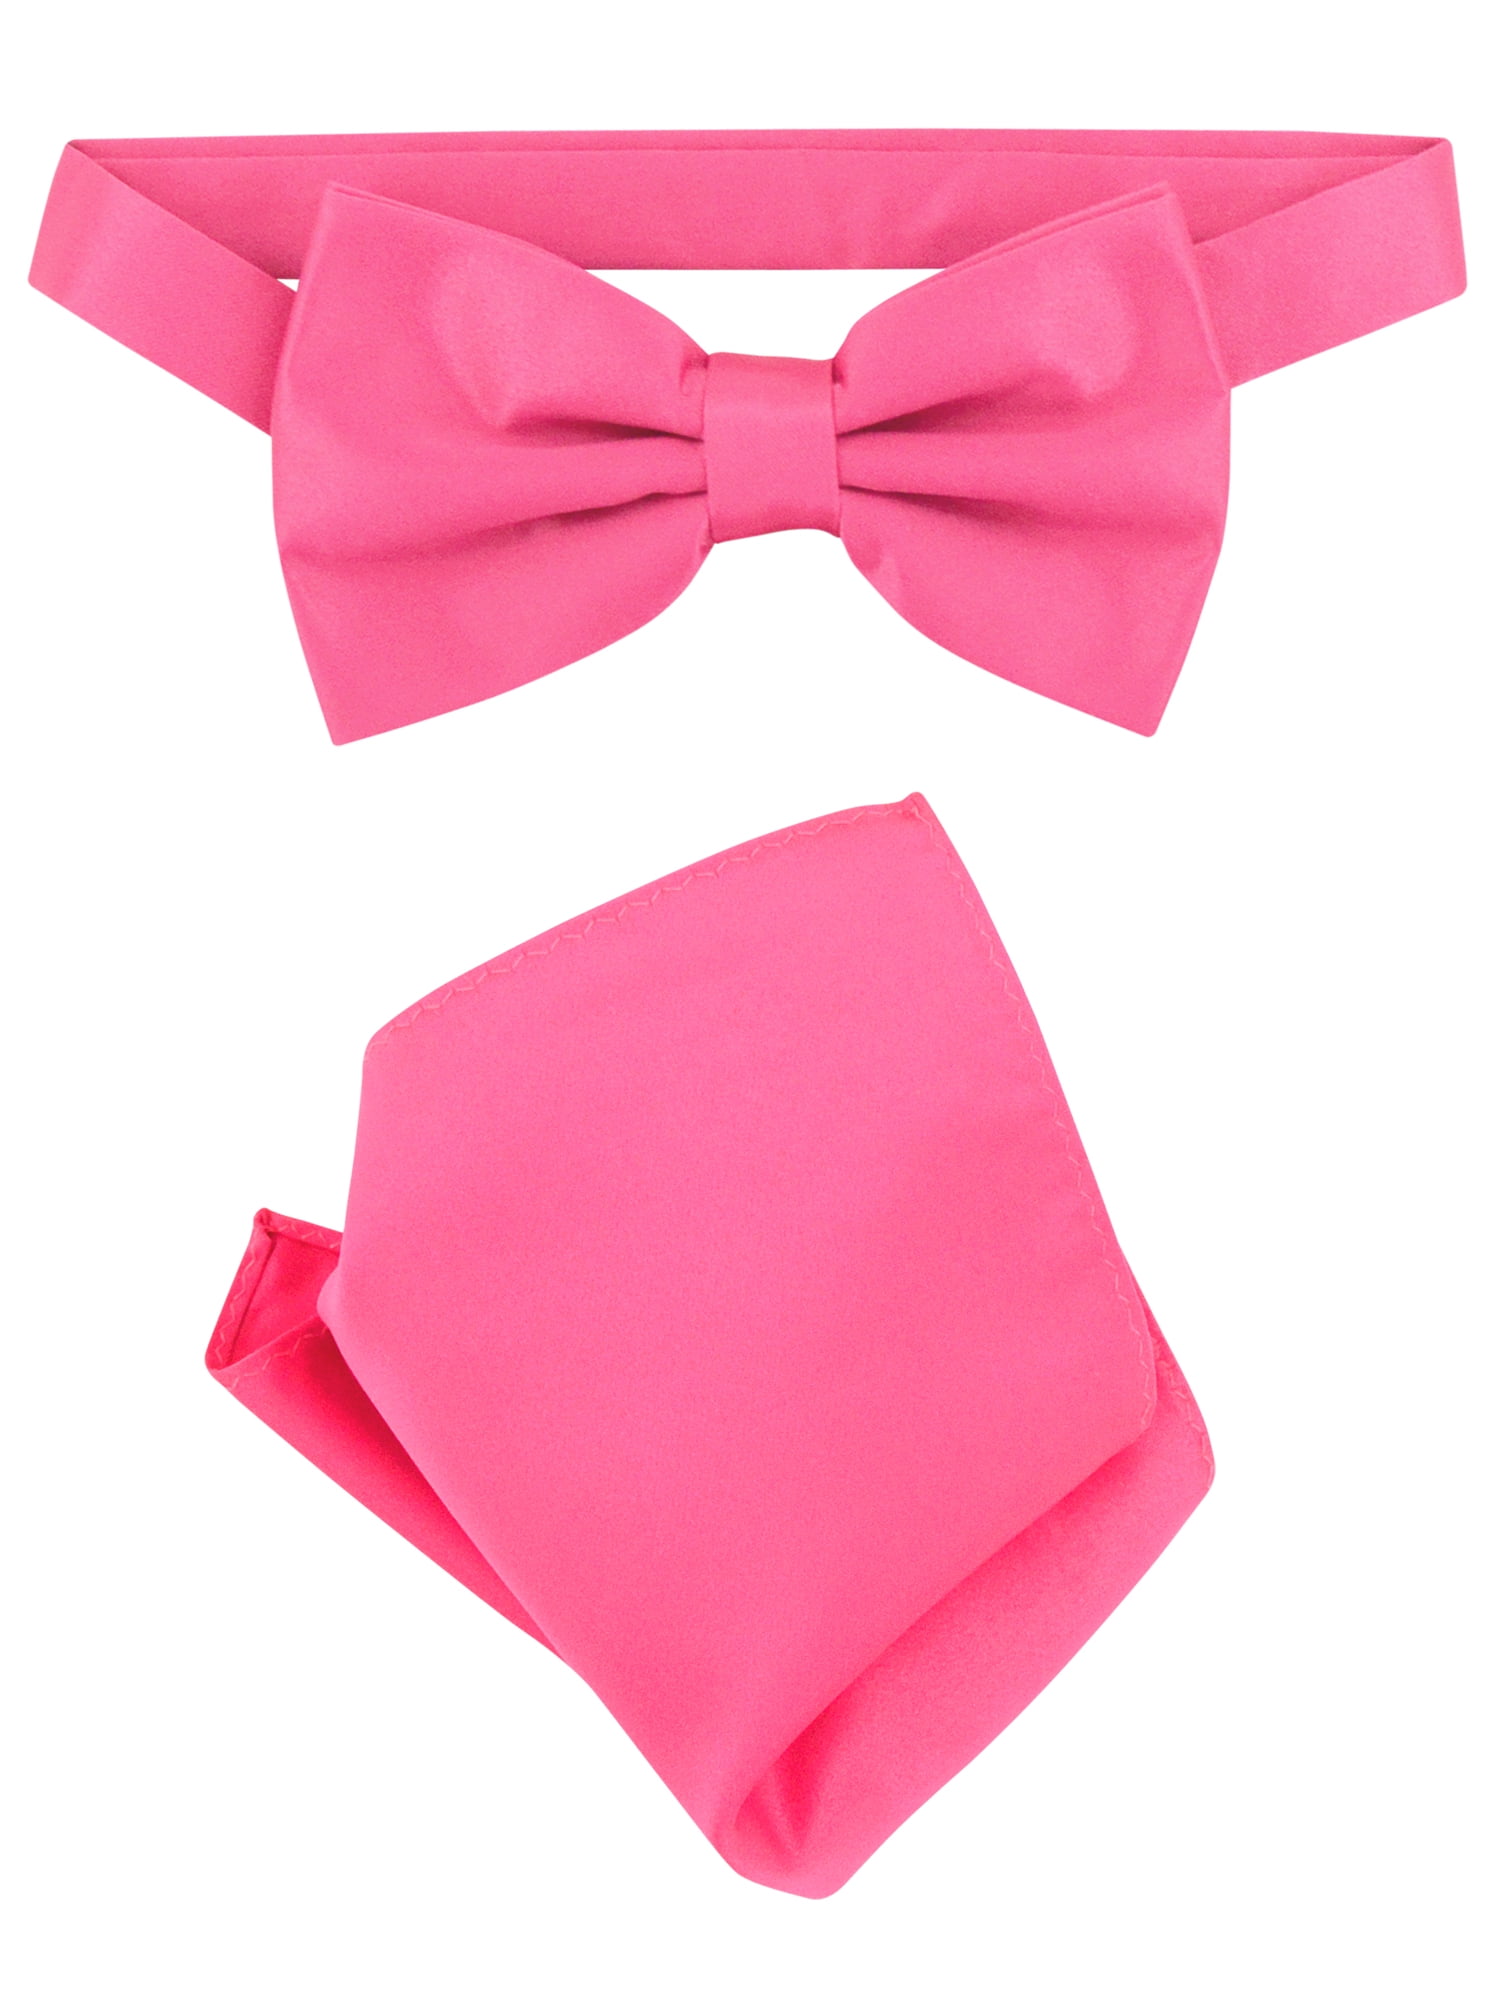 Hot Pink Bow Tie for Men Bowtie Bowties